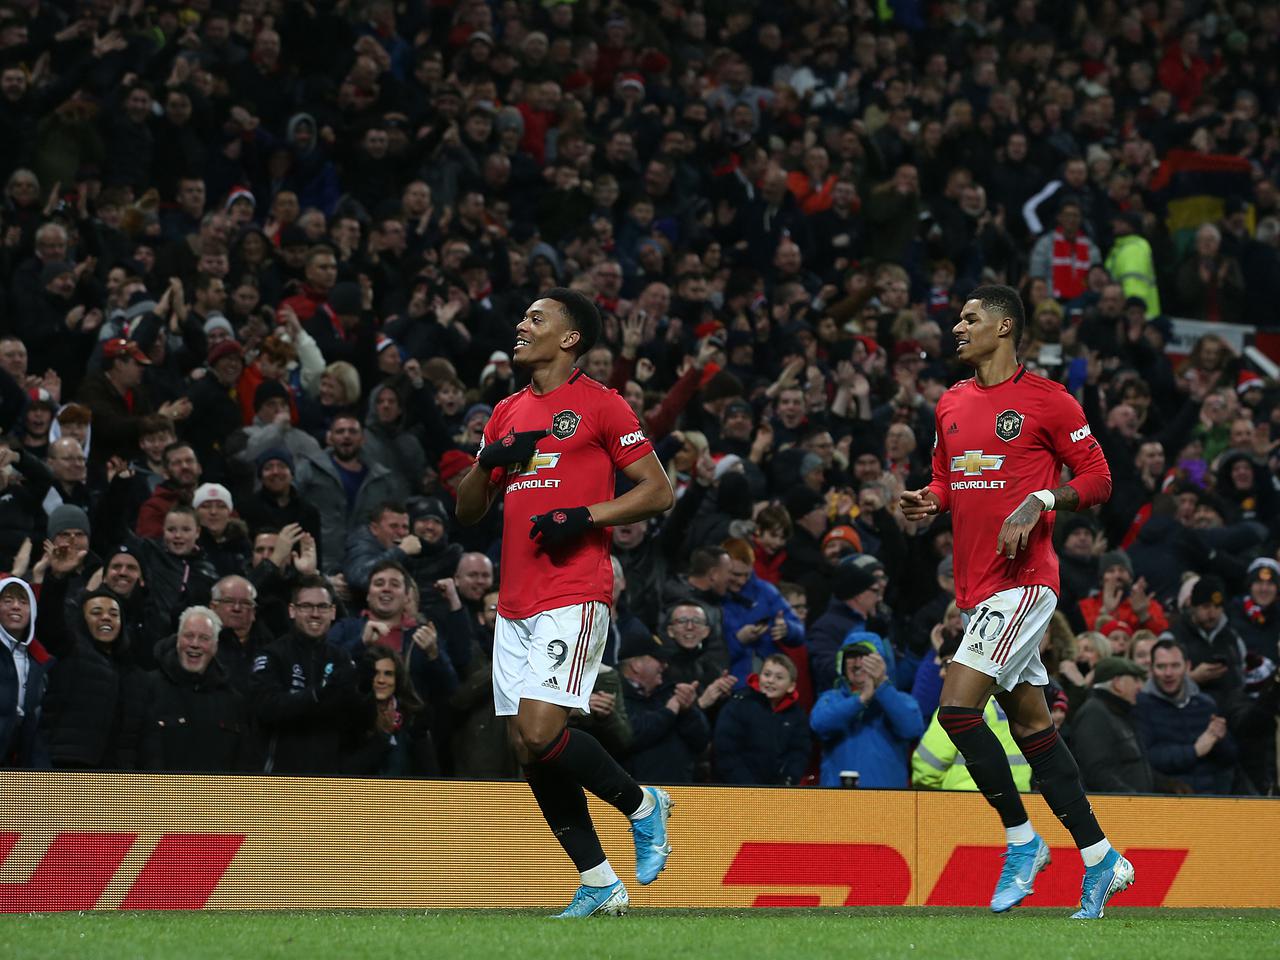 Match Report: Man United 4-1 Newcastle, 26 December 2019 | Manchester United